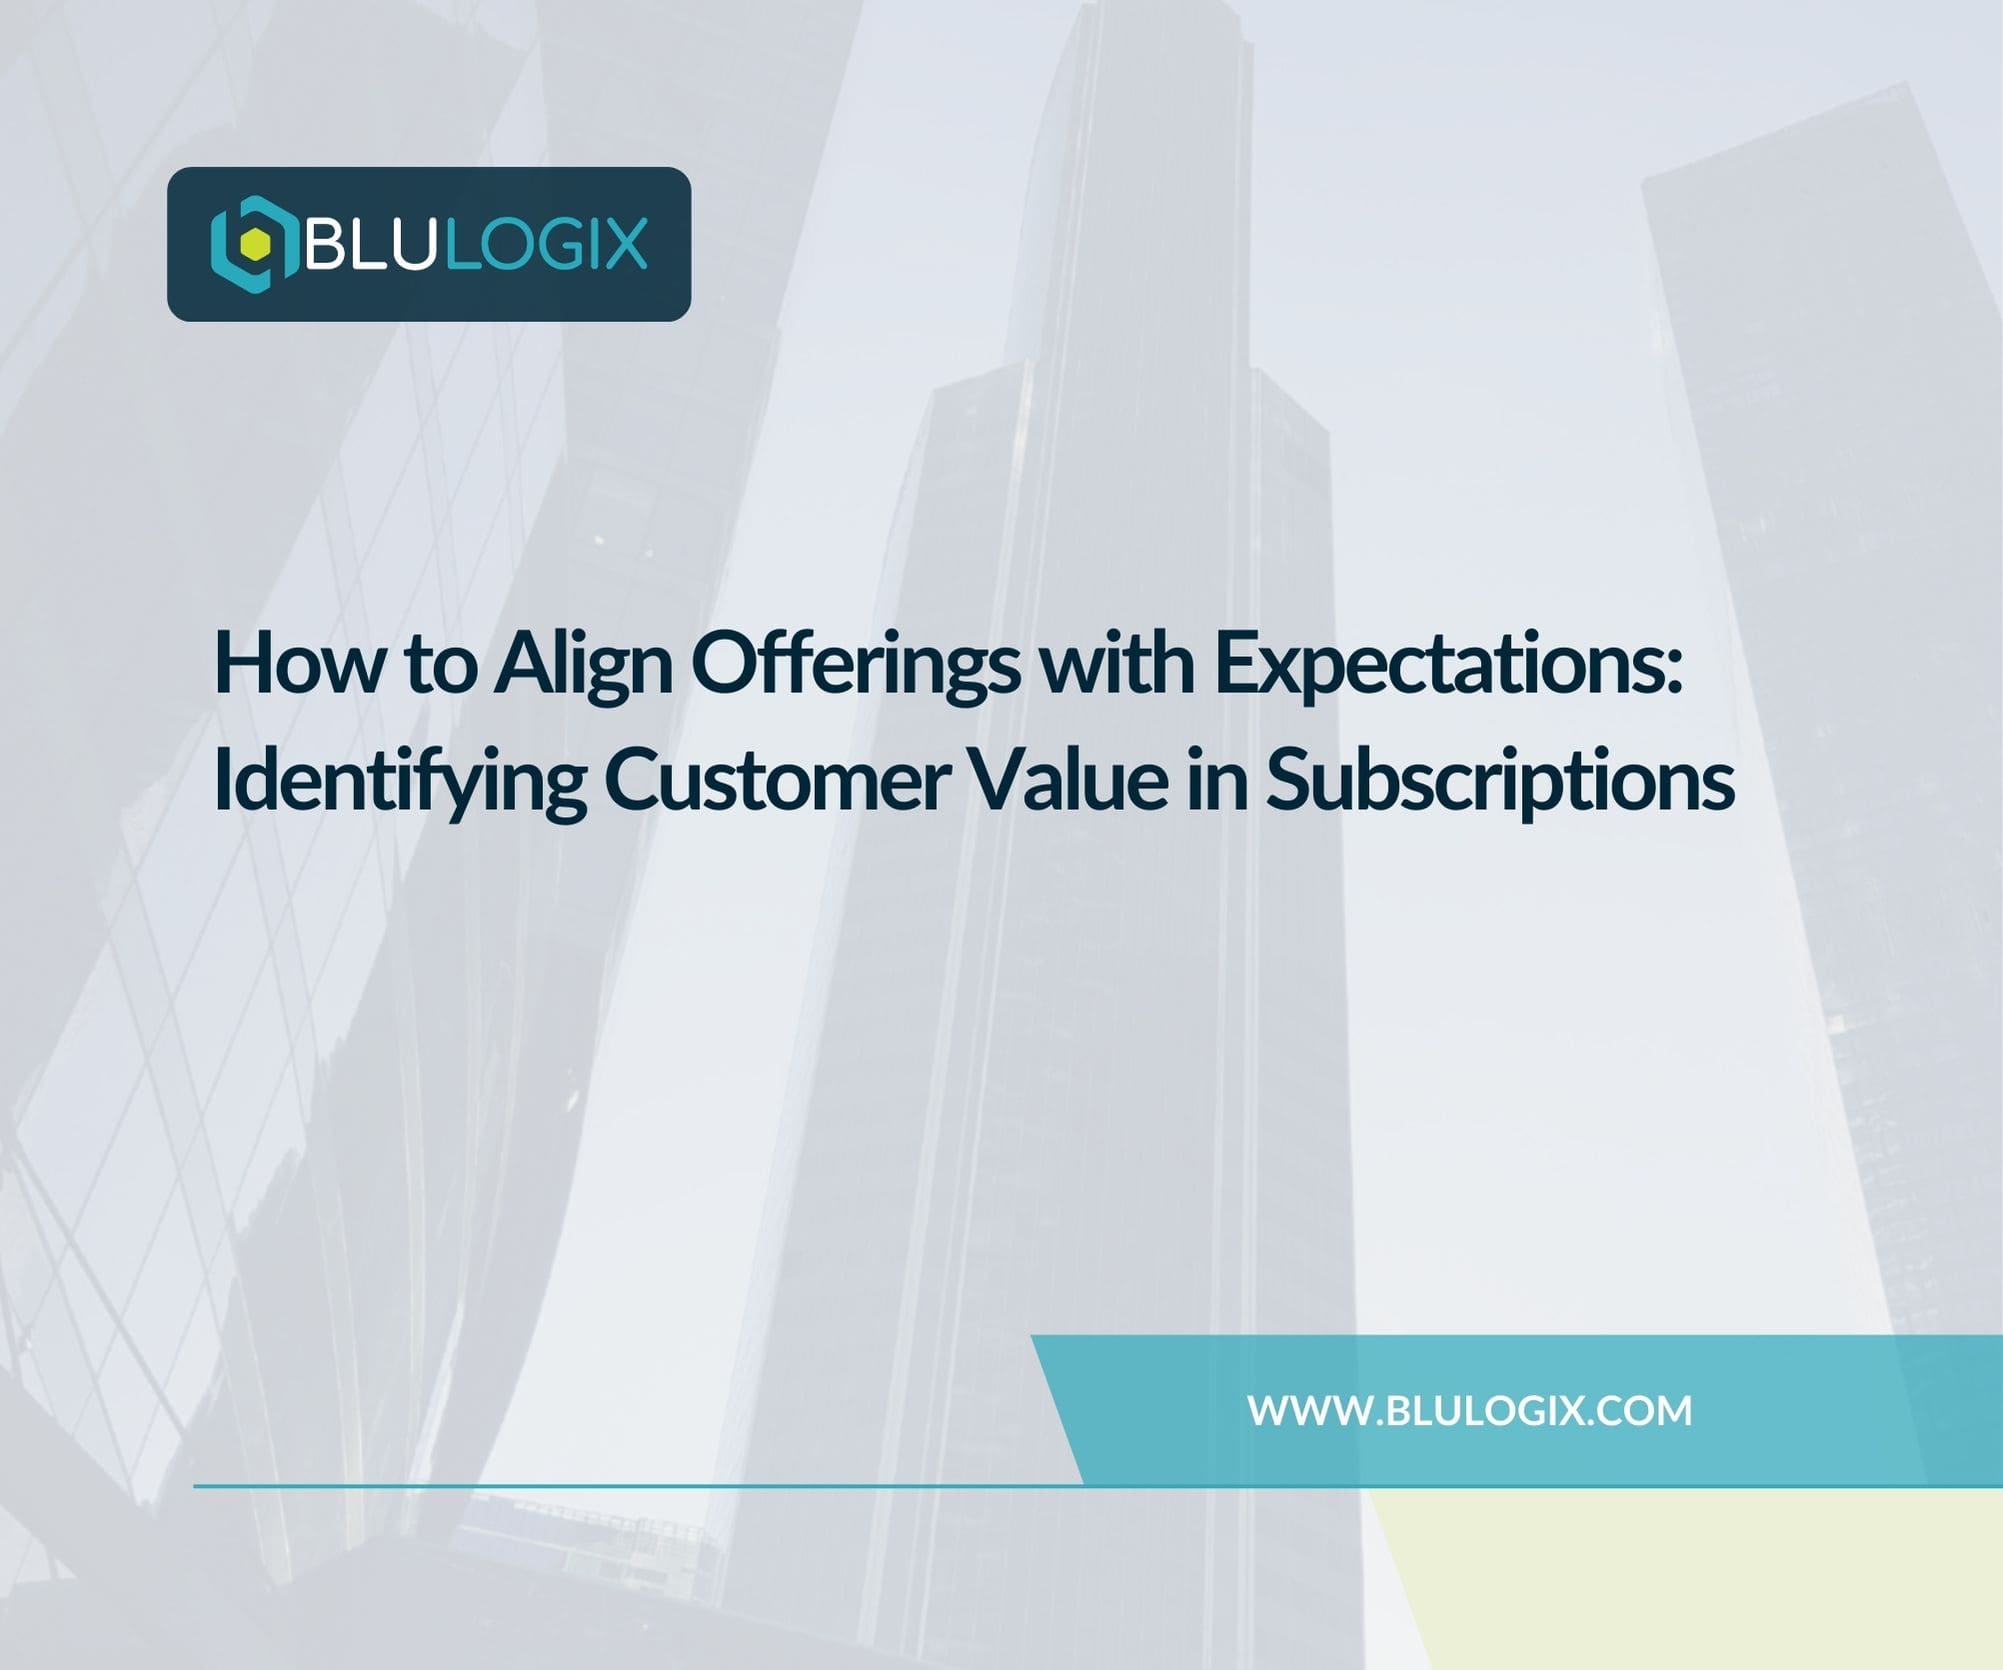 How to Align Offerings with Expectations Identifying Customer Value in Subscriptions